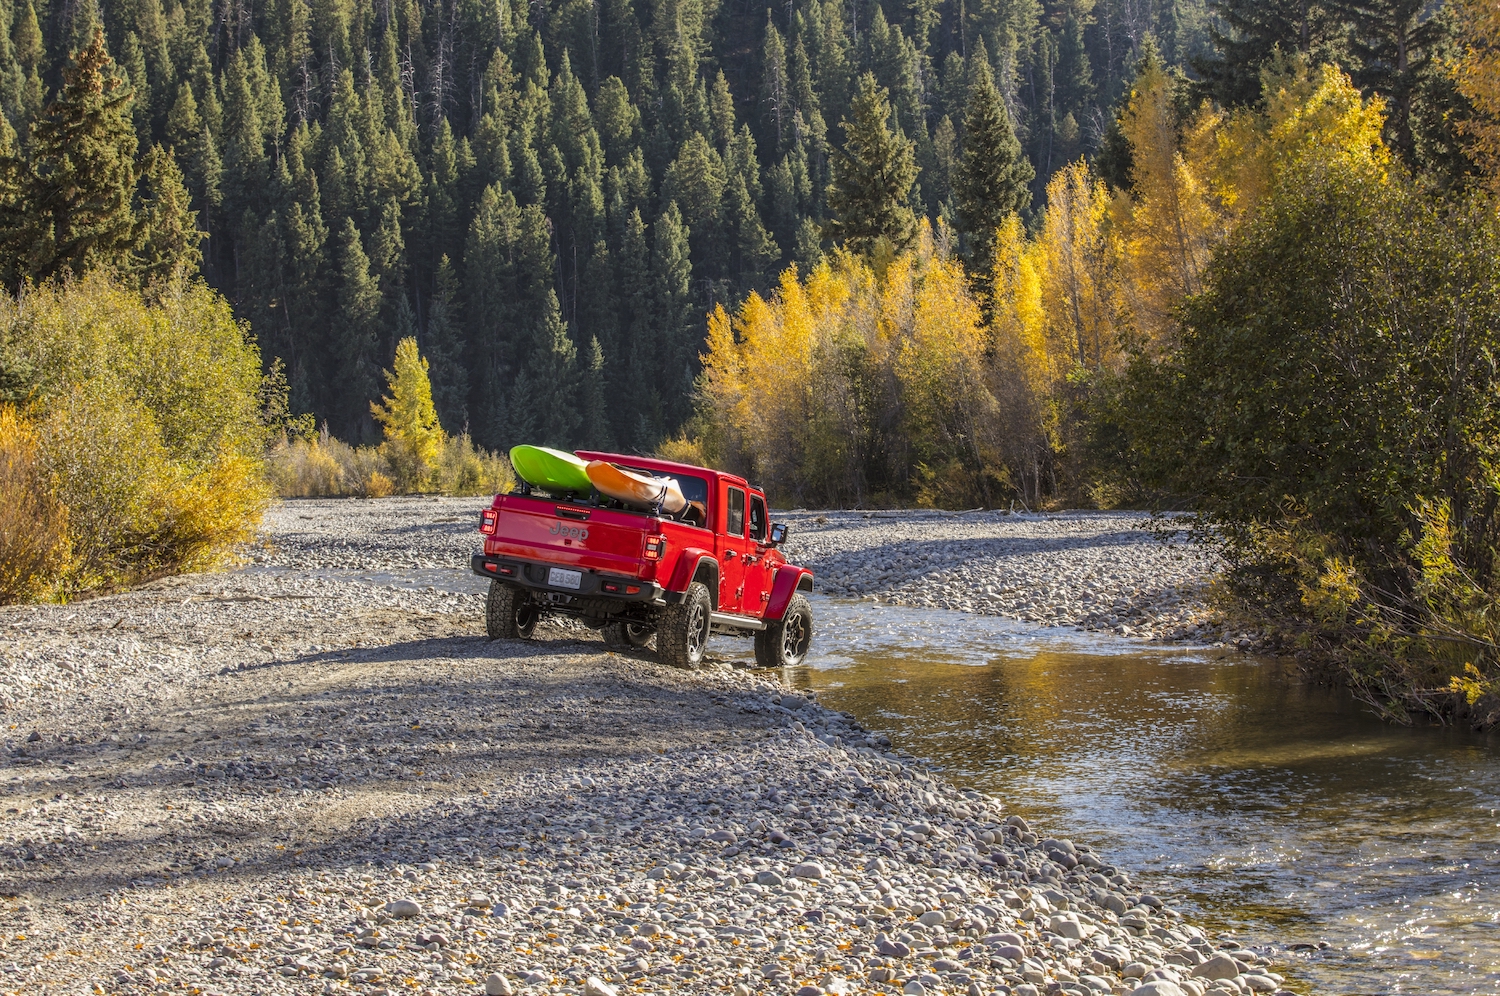 Red Jeep Gladiator pickup truck hauling kayaks through a river, trees visible in the background.